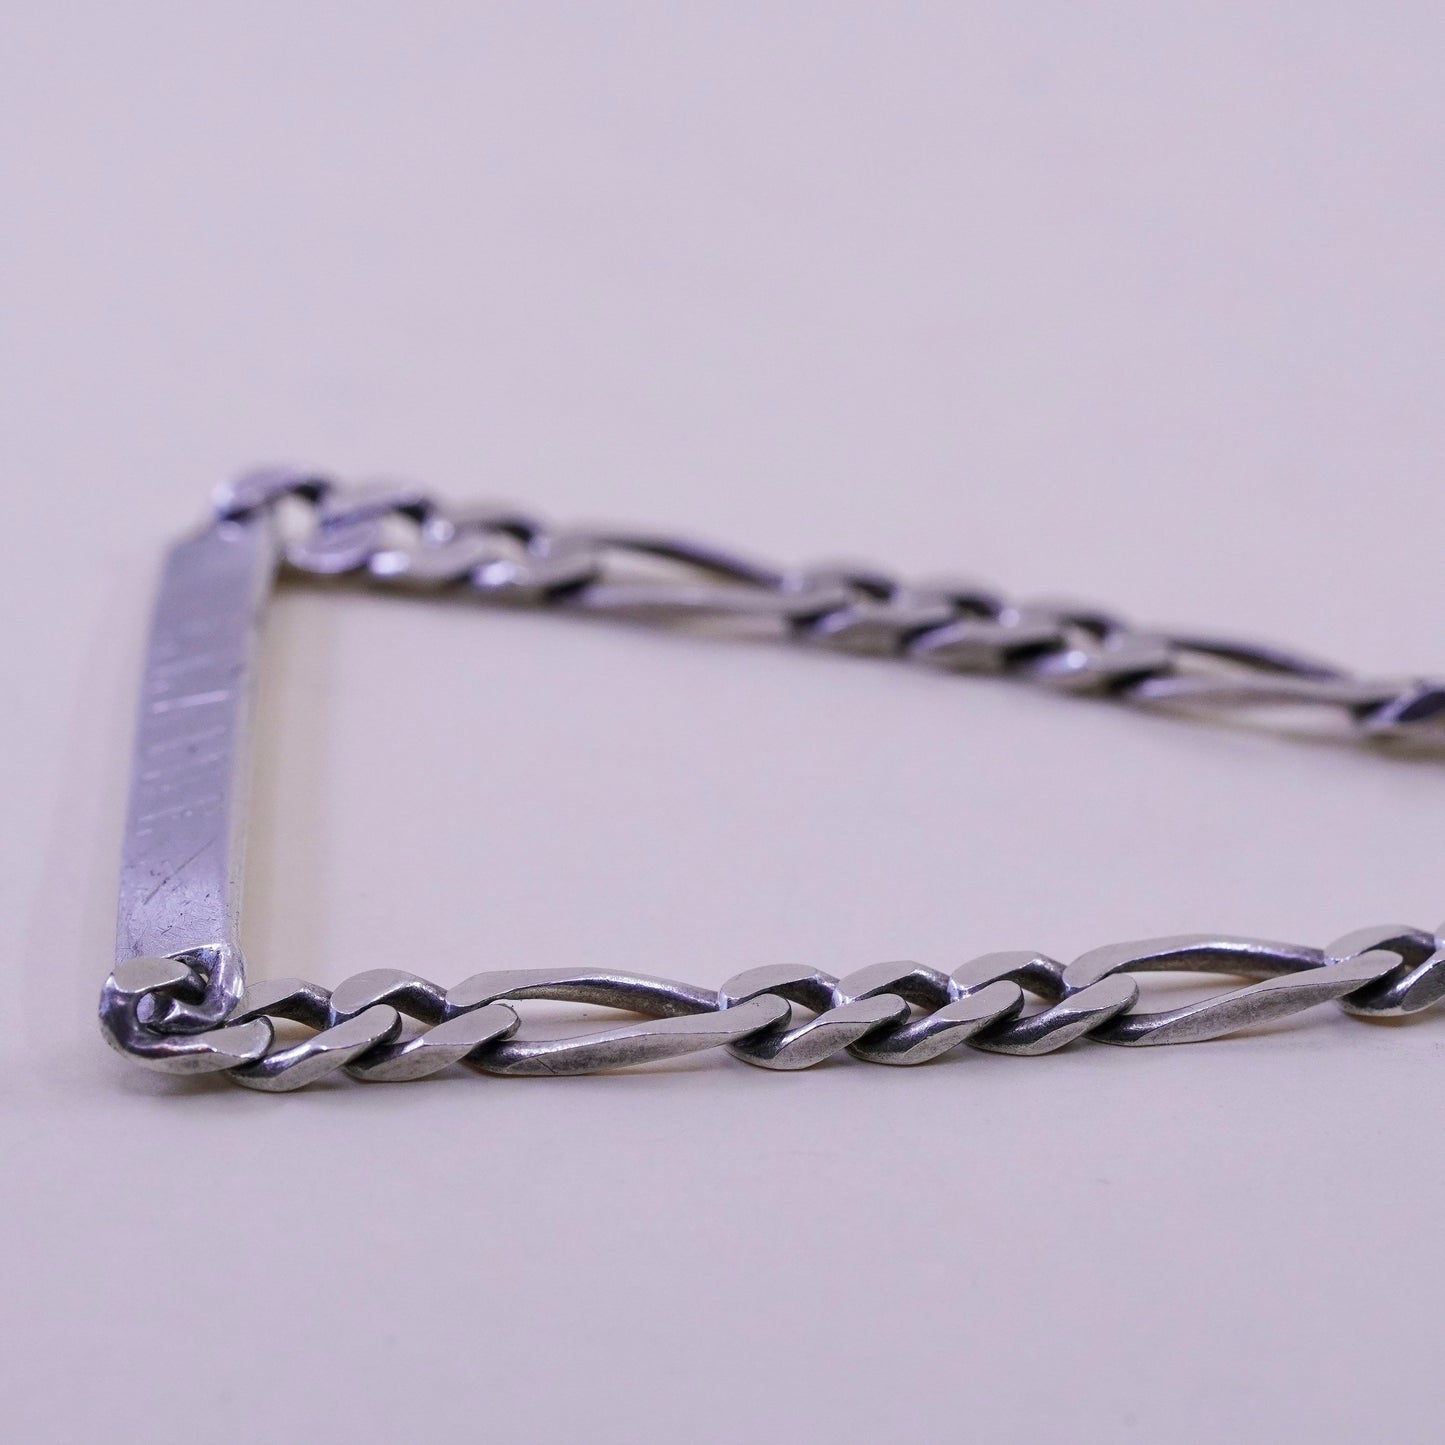 8” Sterling silver bracelet, 925 figaro chain name tag engraved “Elaine”